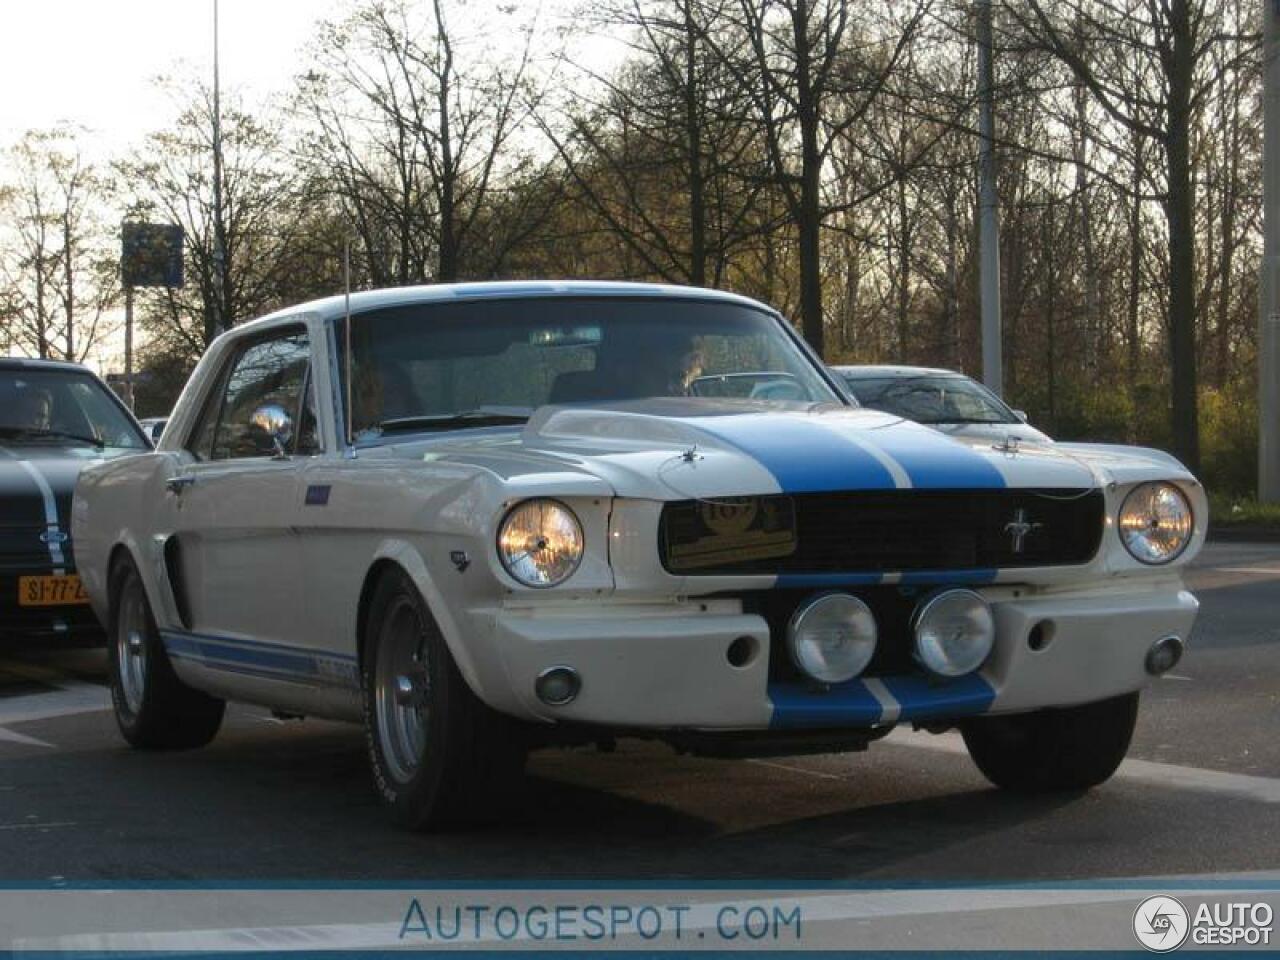 Ford Mustang Shelby G.T. 350